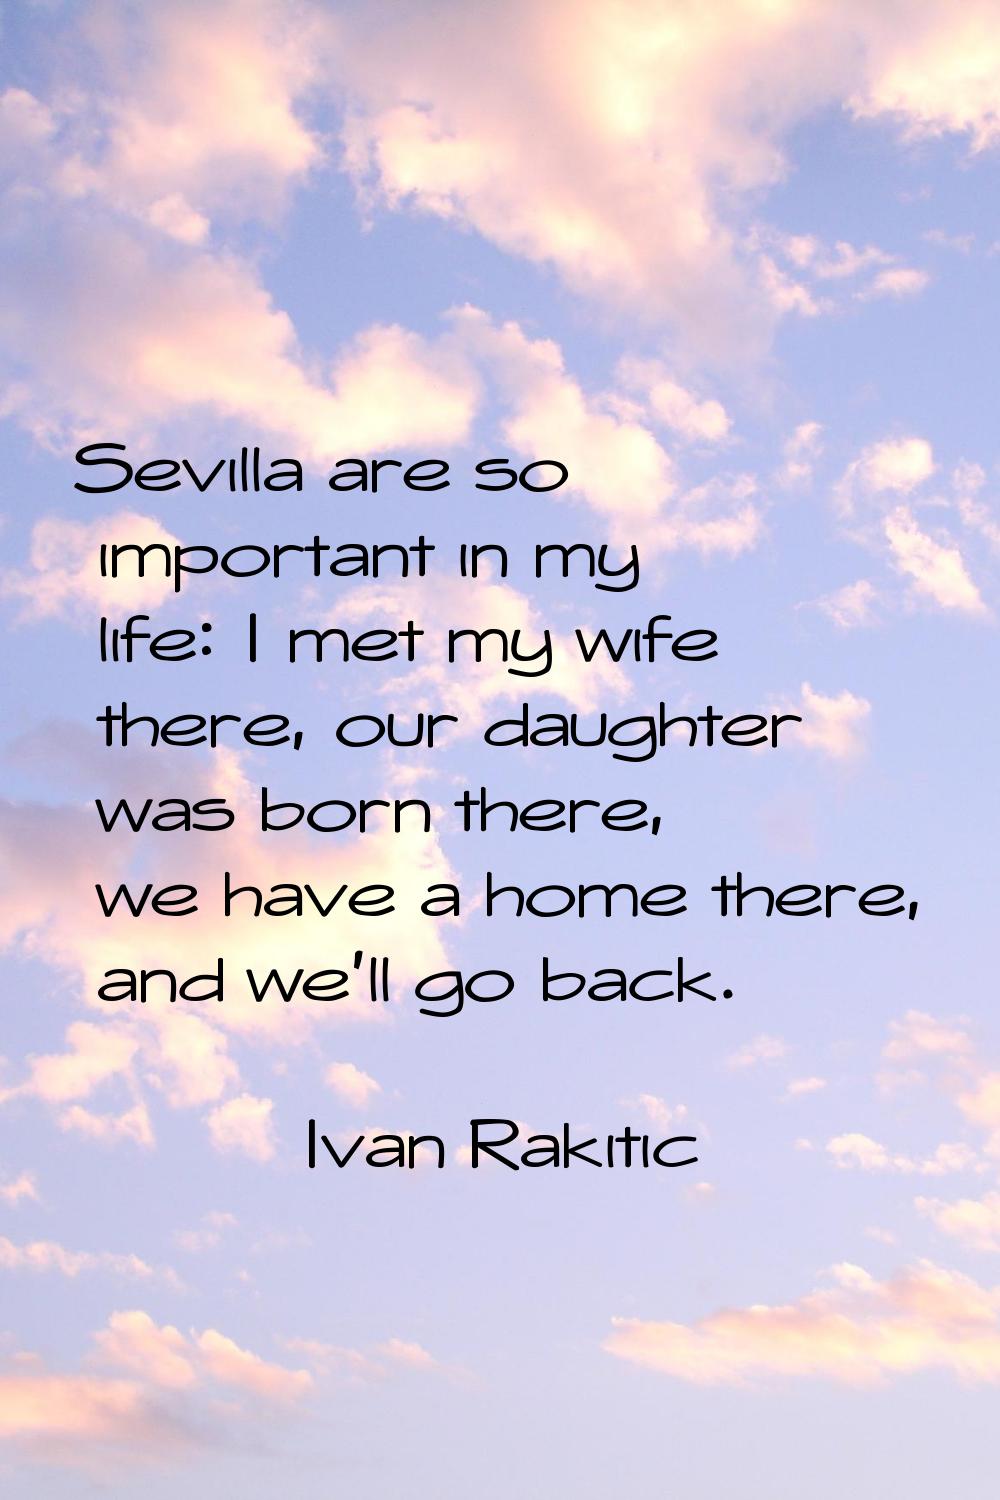 Sevilla are so important in my life: I met my wife there, our daughter was born there, we have a ho